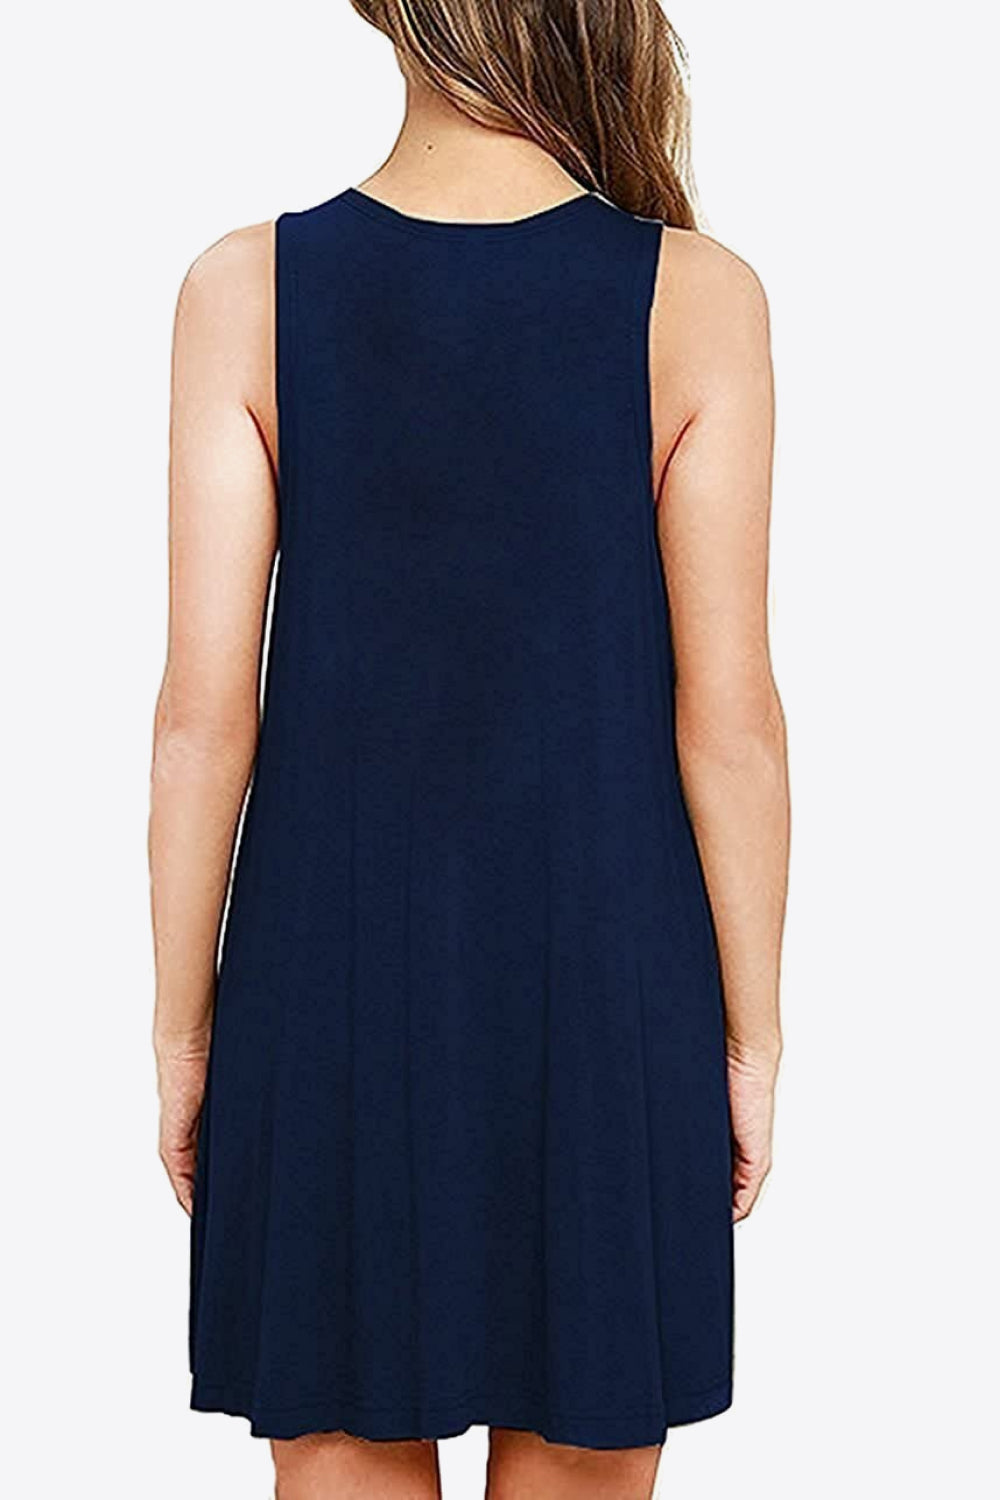 Full Size Round Neck Sleeveless Dress with Pockets - AllIn Computer